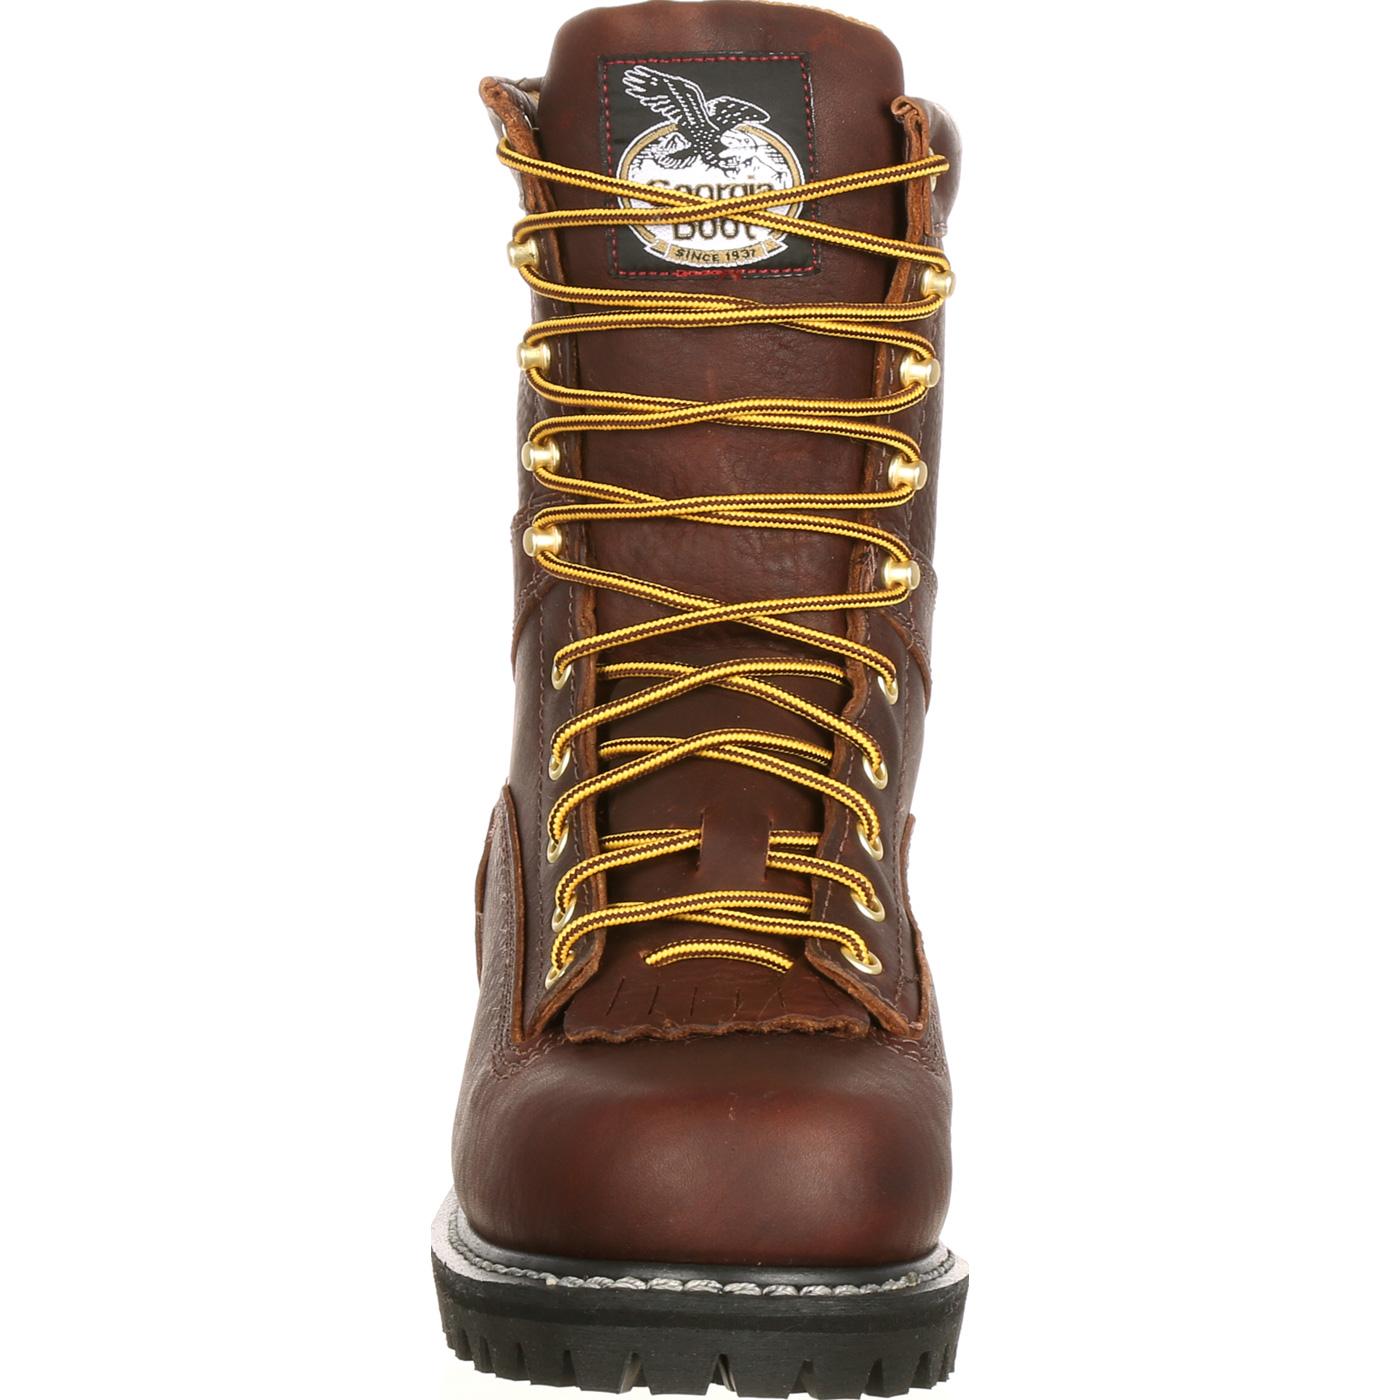 Georgia Boot Lace-To-Toe Vibram Work Boot, style #G8044